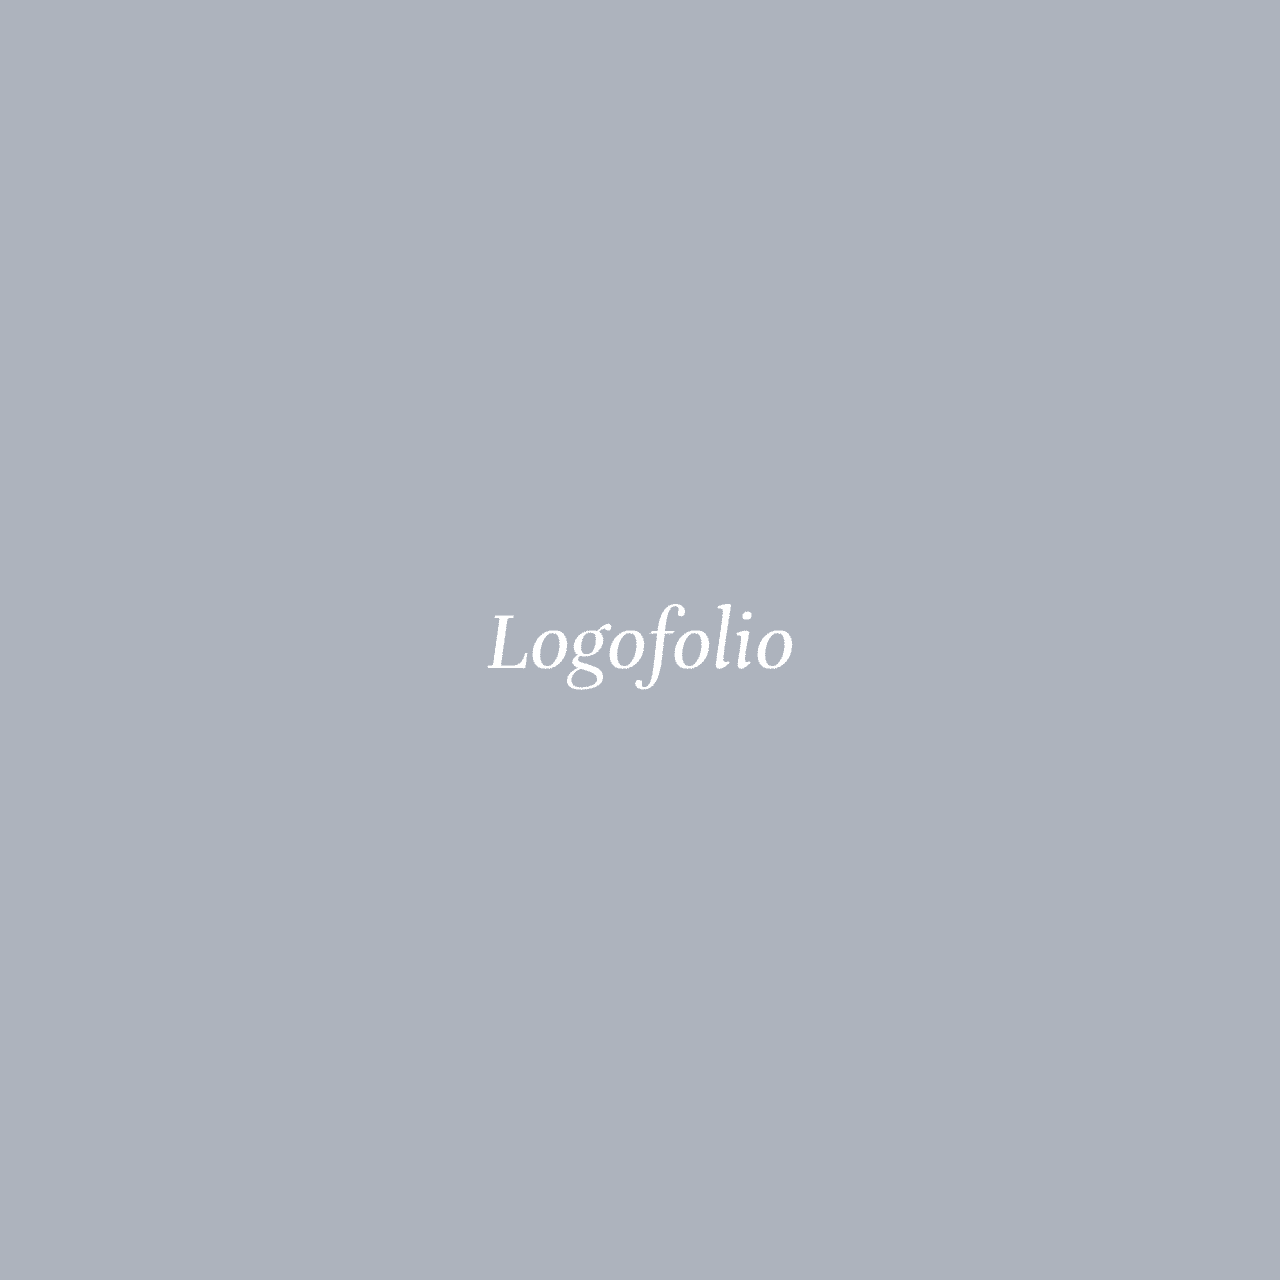 Simple Logofolio tile with white text and gray background